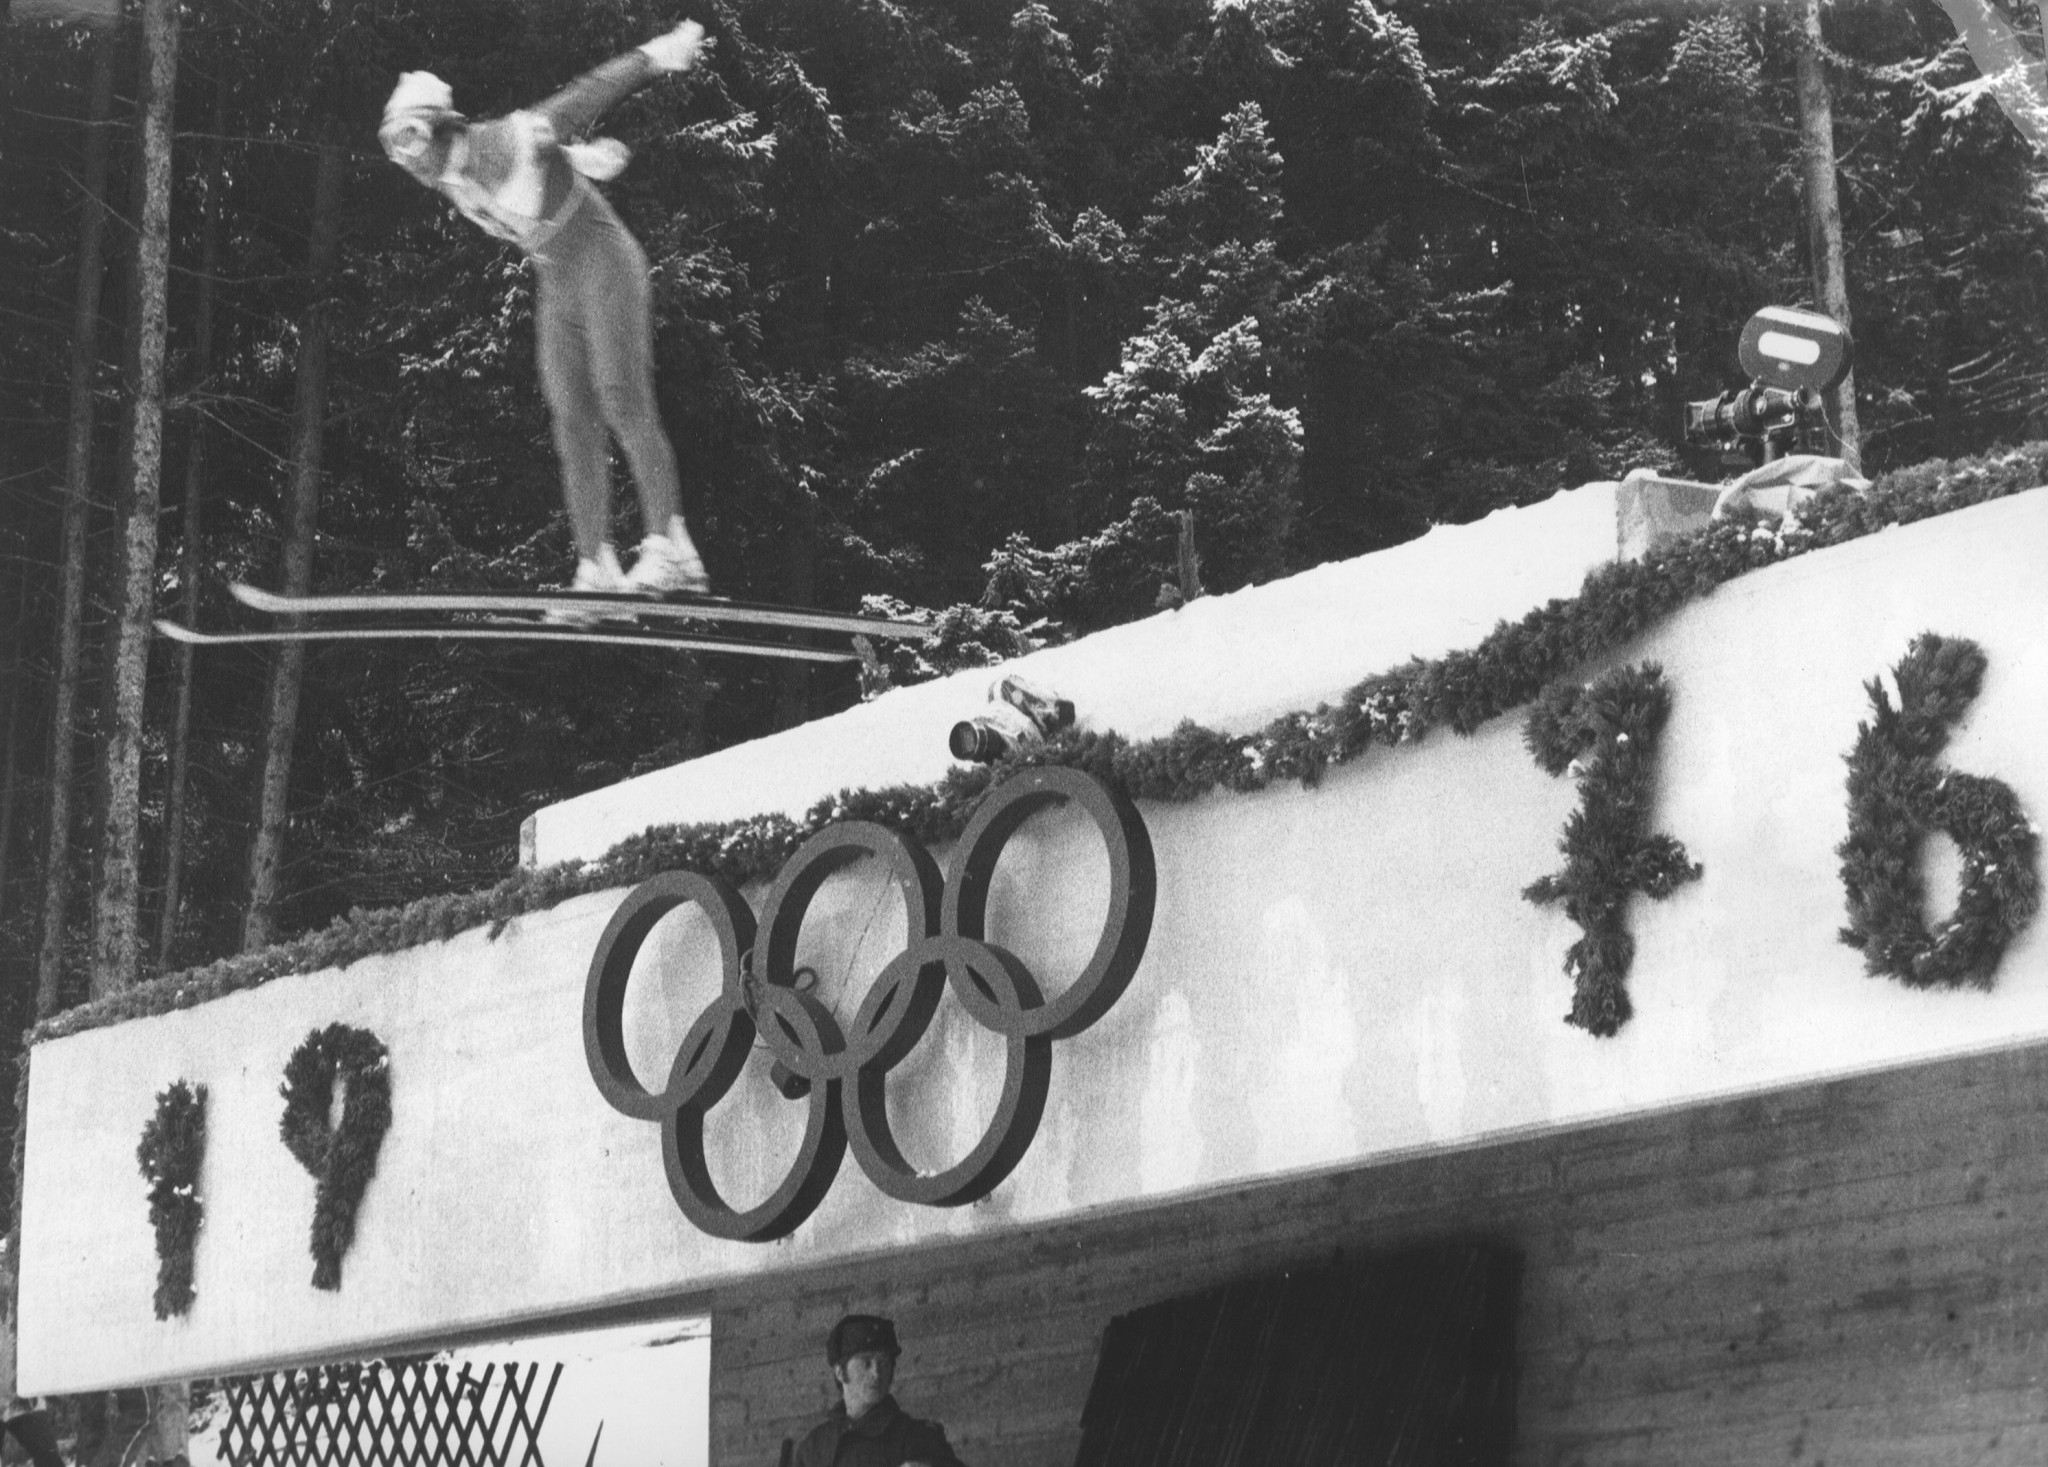 Innsbruck last hosted the Winter Olympics in 1976 ©Getty Images